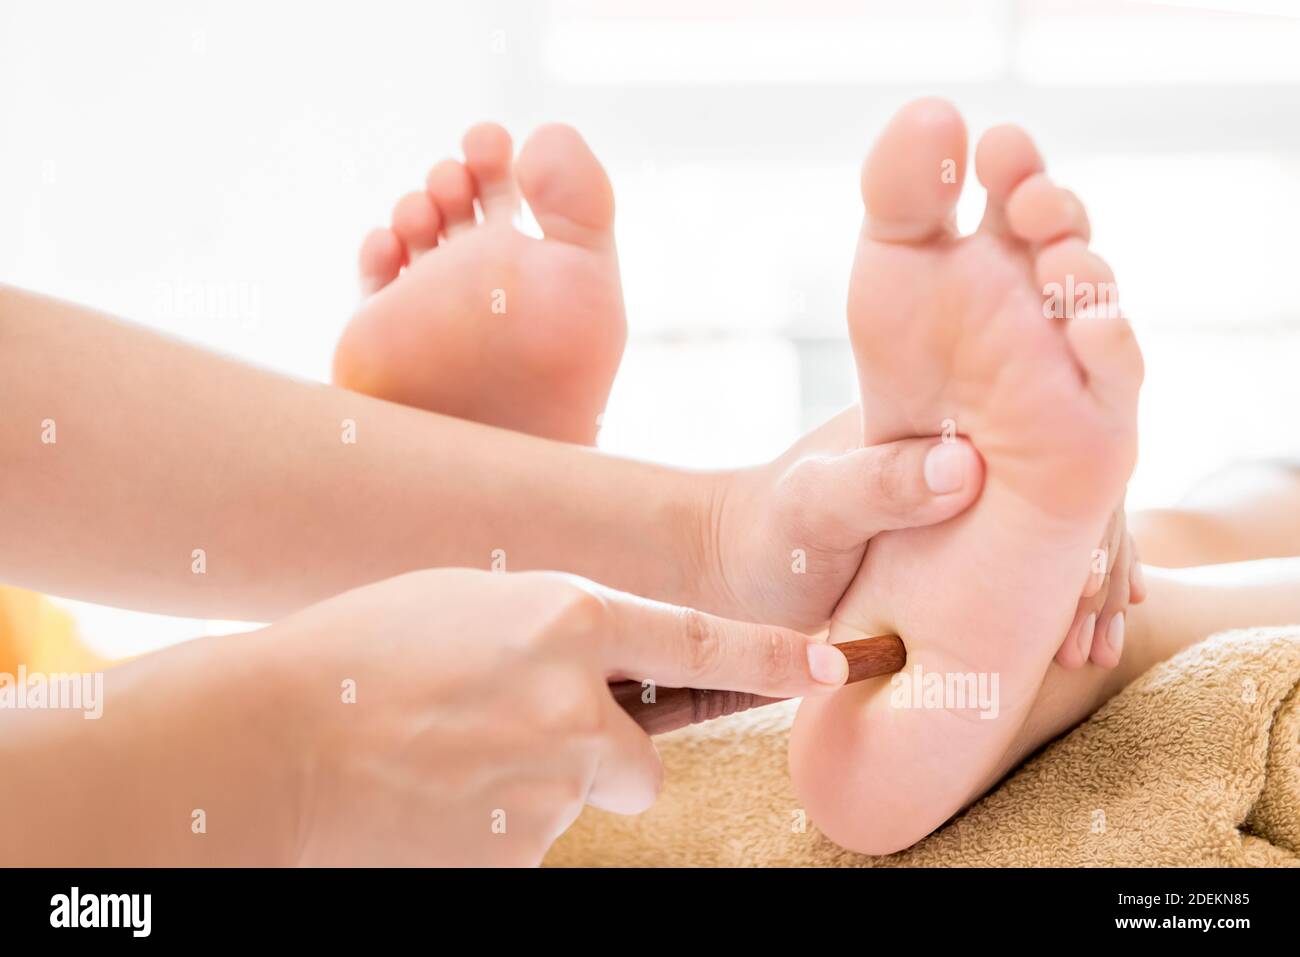 Professional therapist giving reflexology relaxing traditional Thai foot massage treatment with stick to a woman in spa Stock Photo